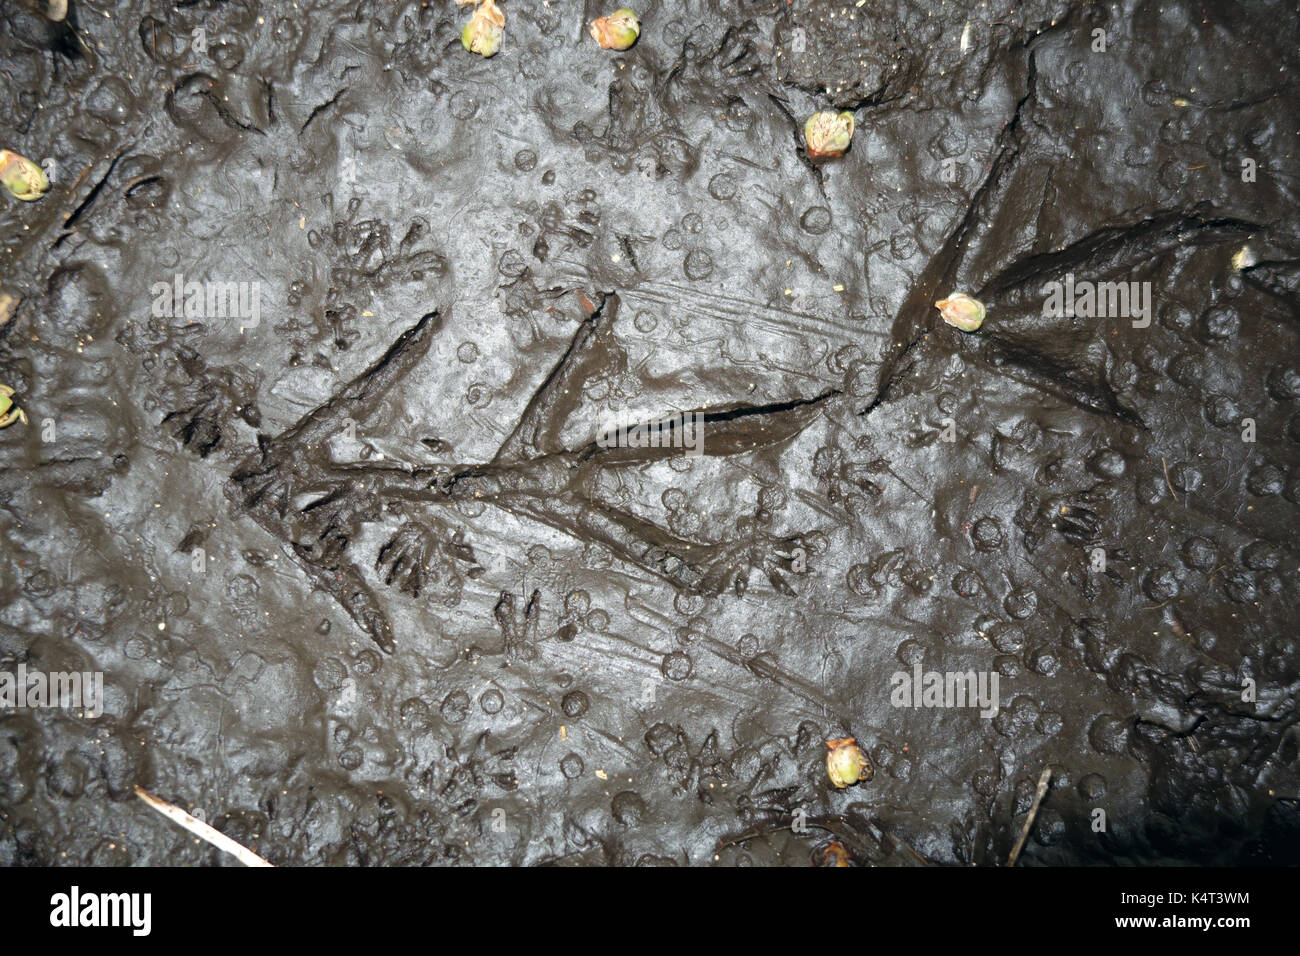 Endangered woodhen footprints in mud surrounded by feral rat footprints, Lord Howe Island, NSW, Australia Stock Photo